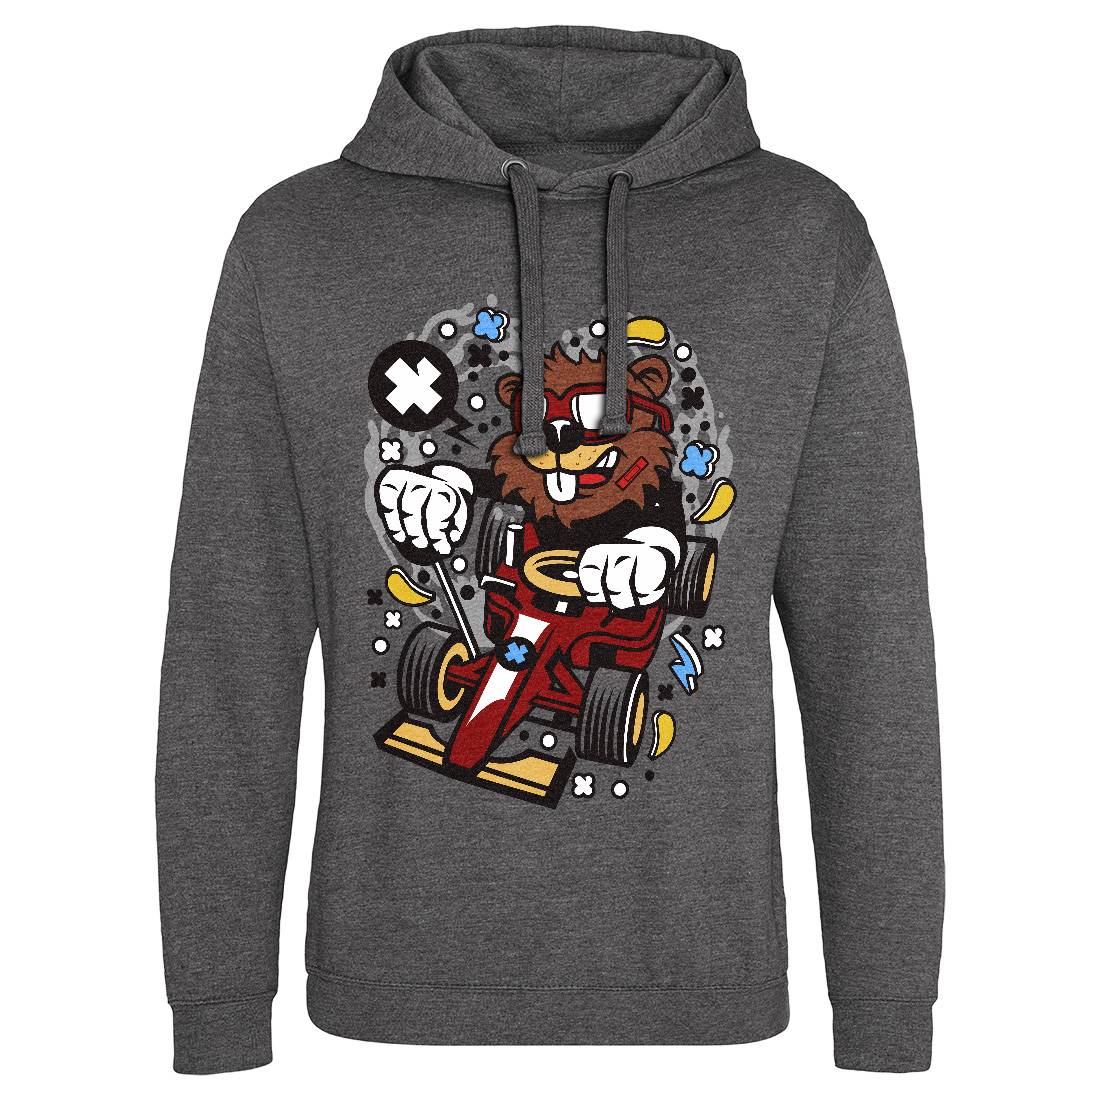 Beaver Racer Mens Hoodie Without Pocket Cars C496